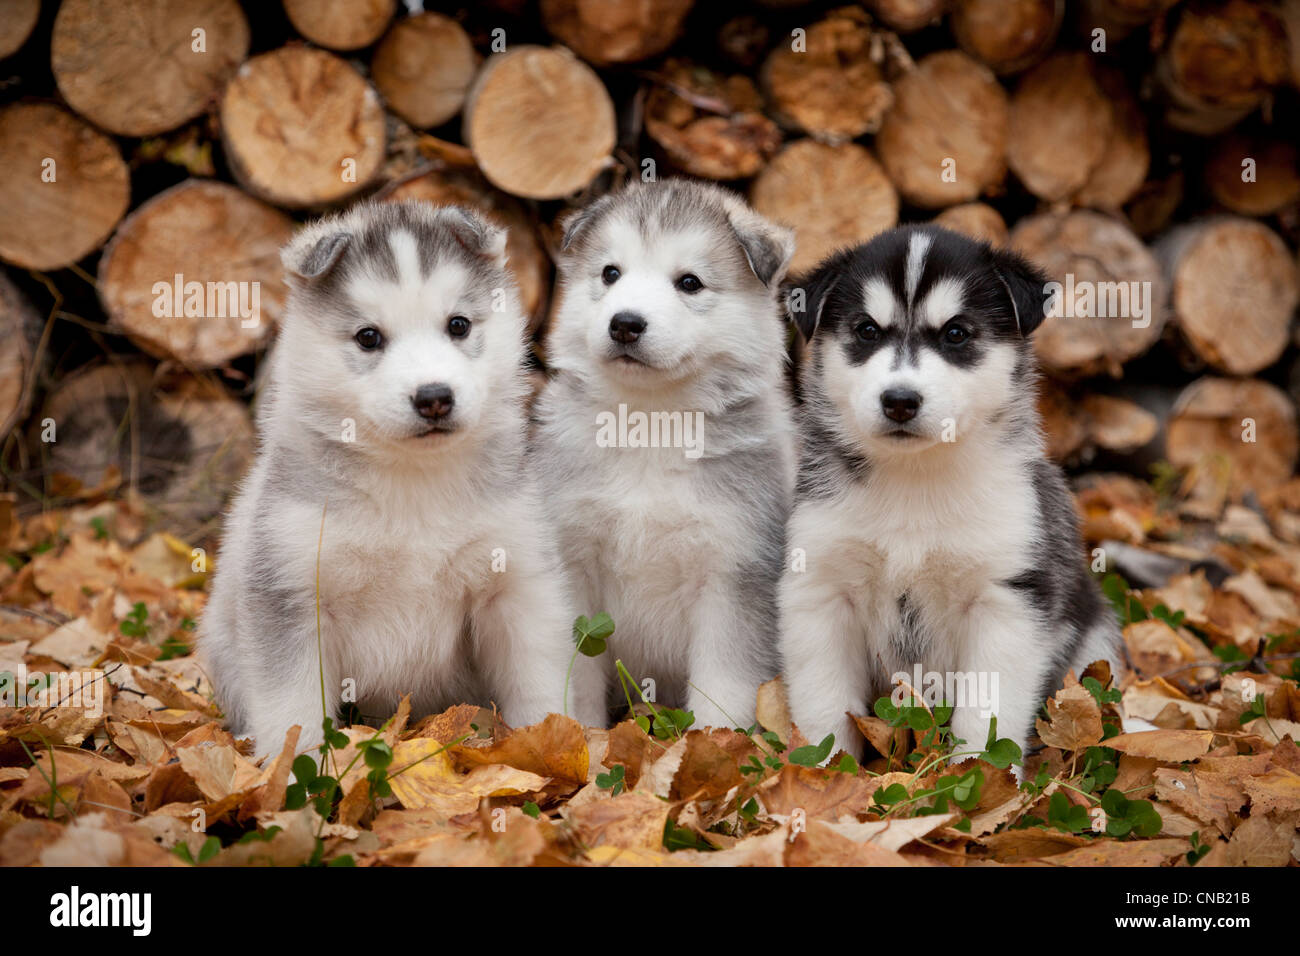 Siberian Husky puppies sit in Autumn leaves in front of a stack of firewood logs, Alaska Stock Photo